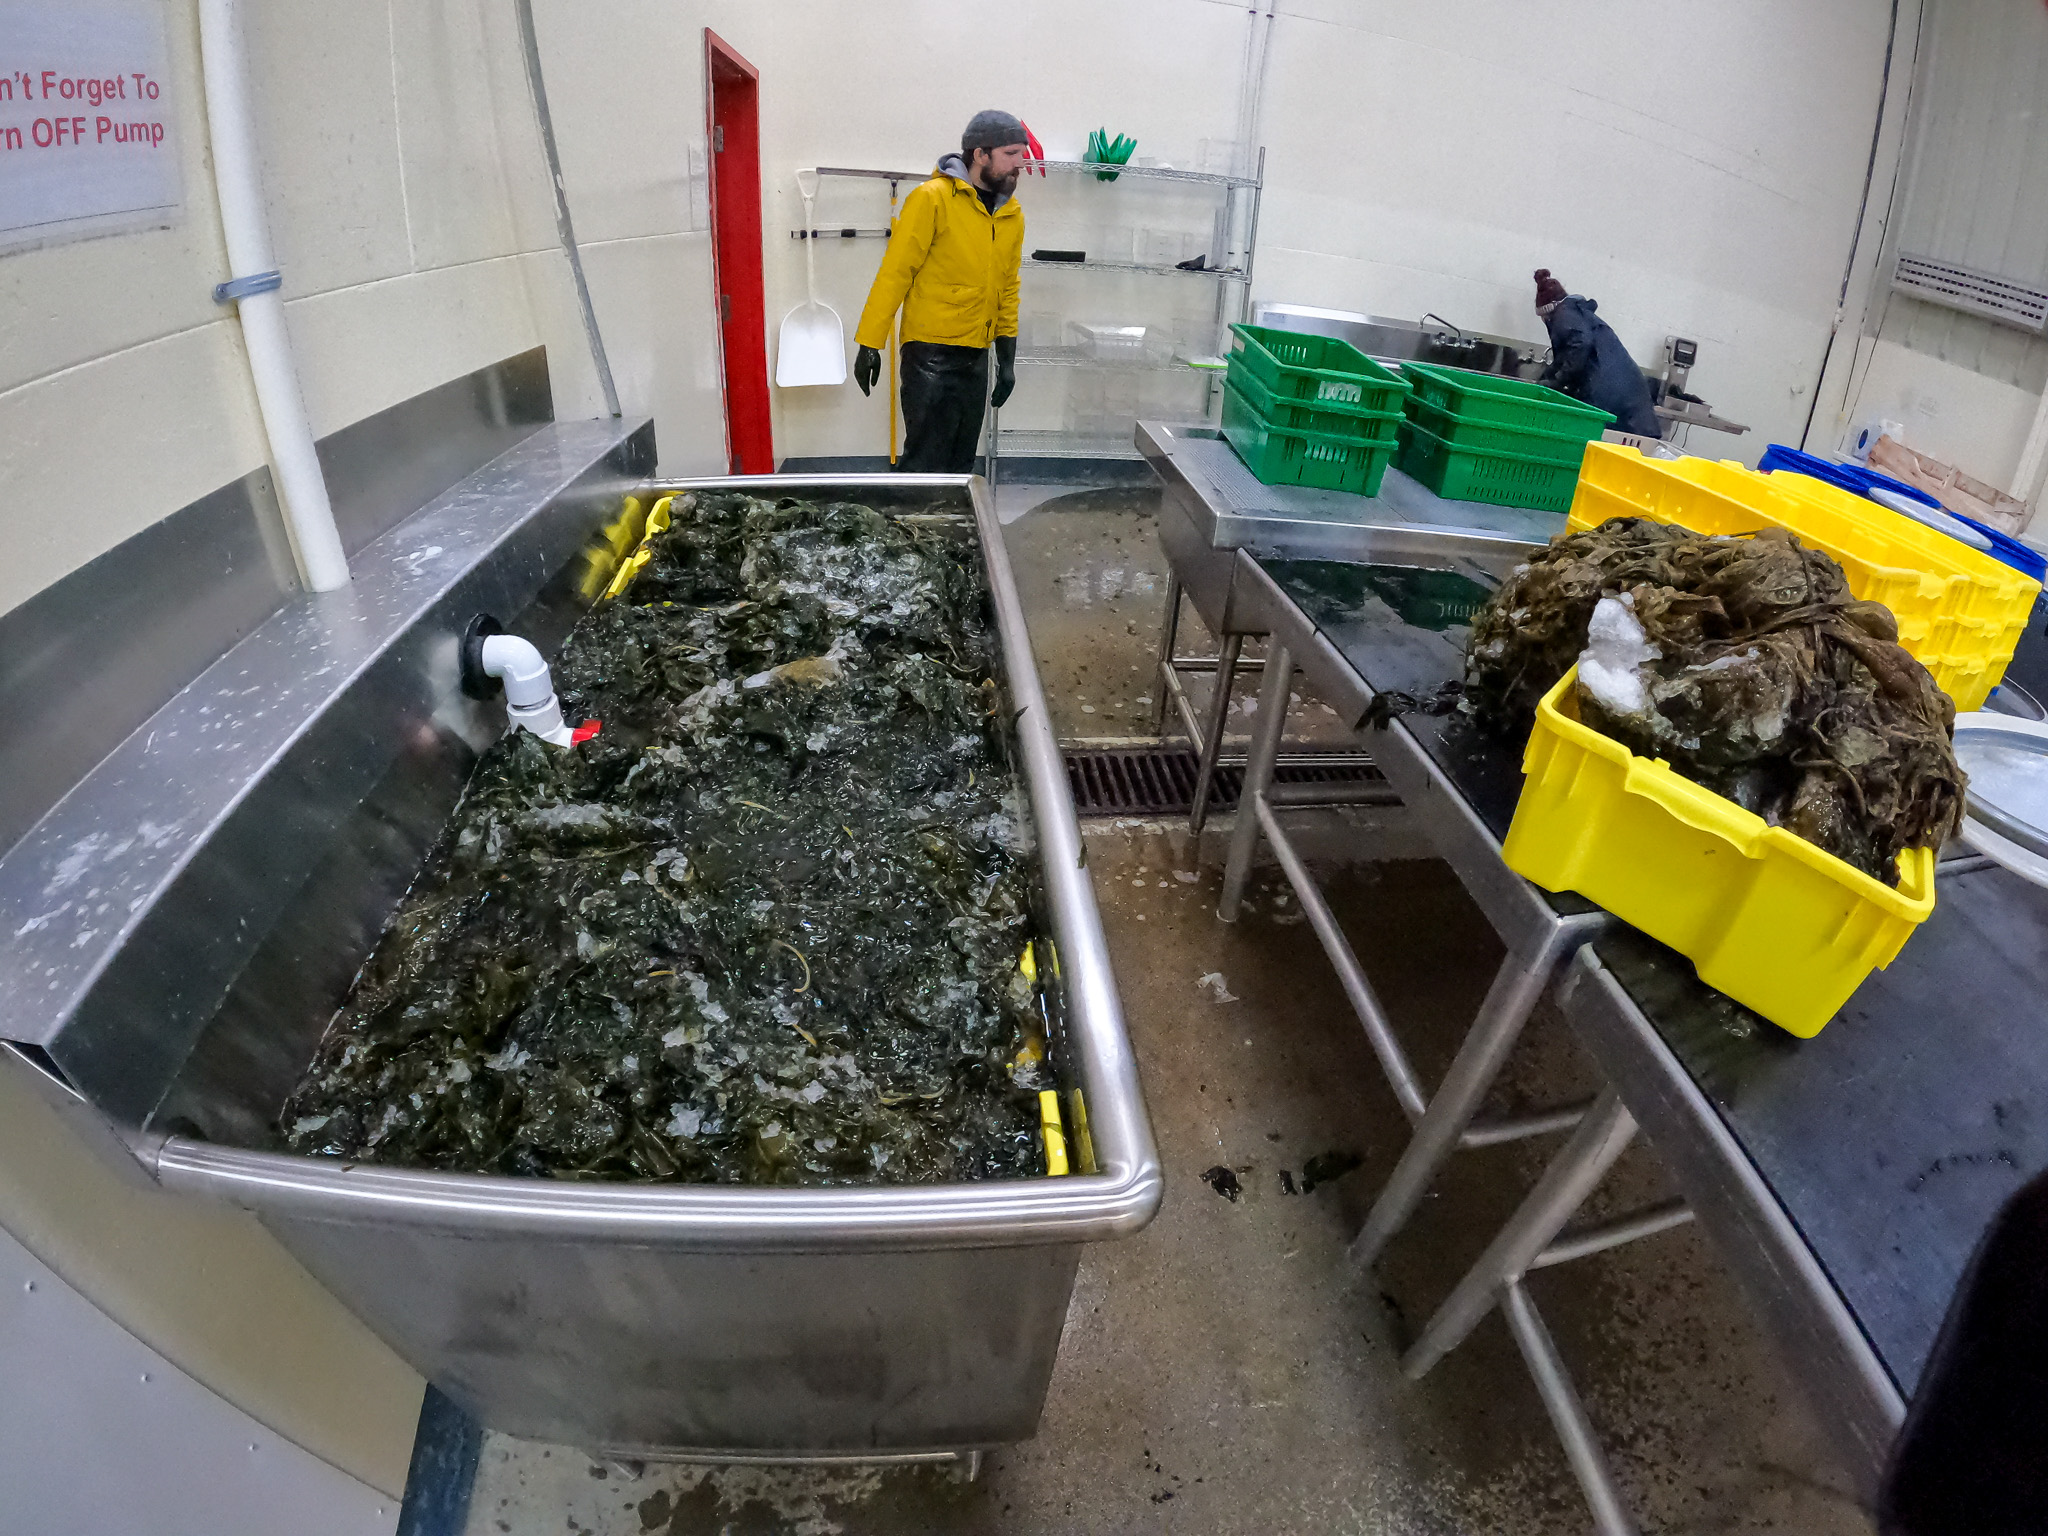 Our Food Systems Coordinator, Charles Gerein, processes 900 lbs of kelp.